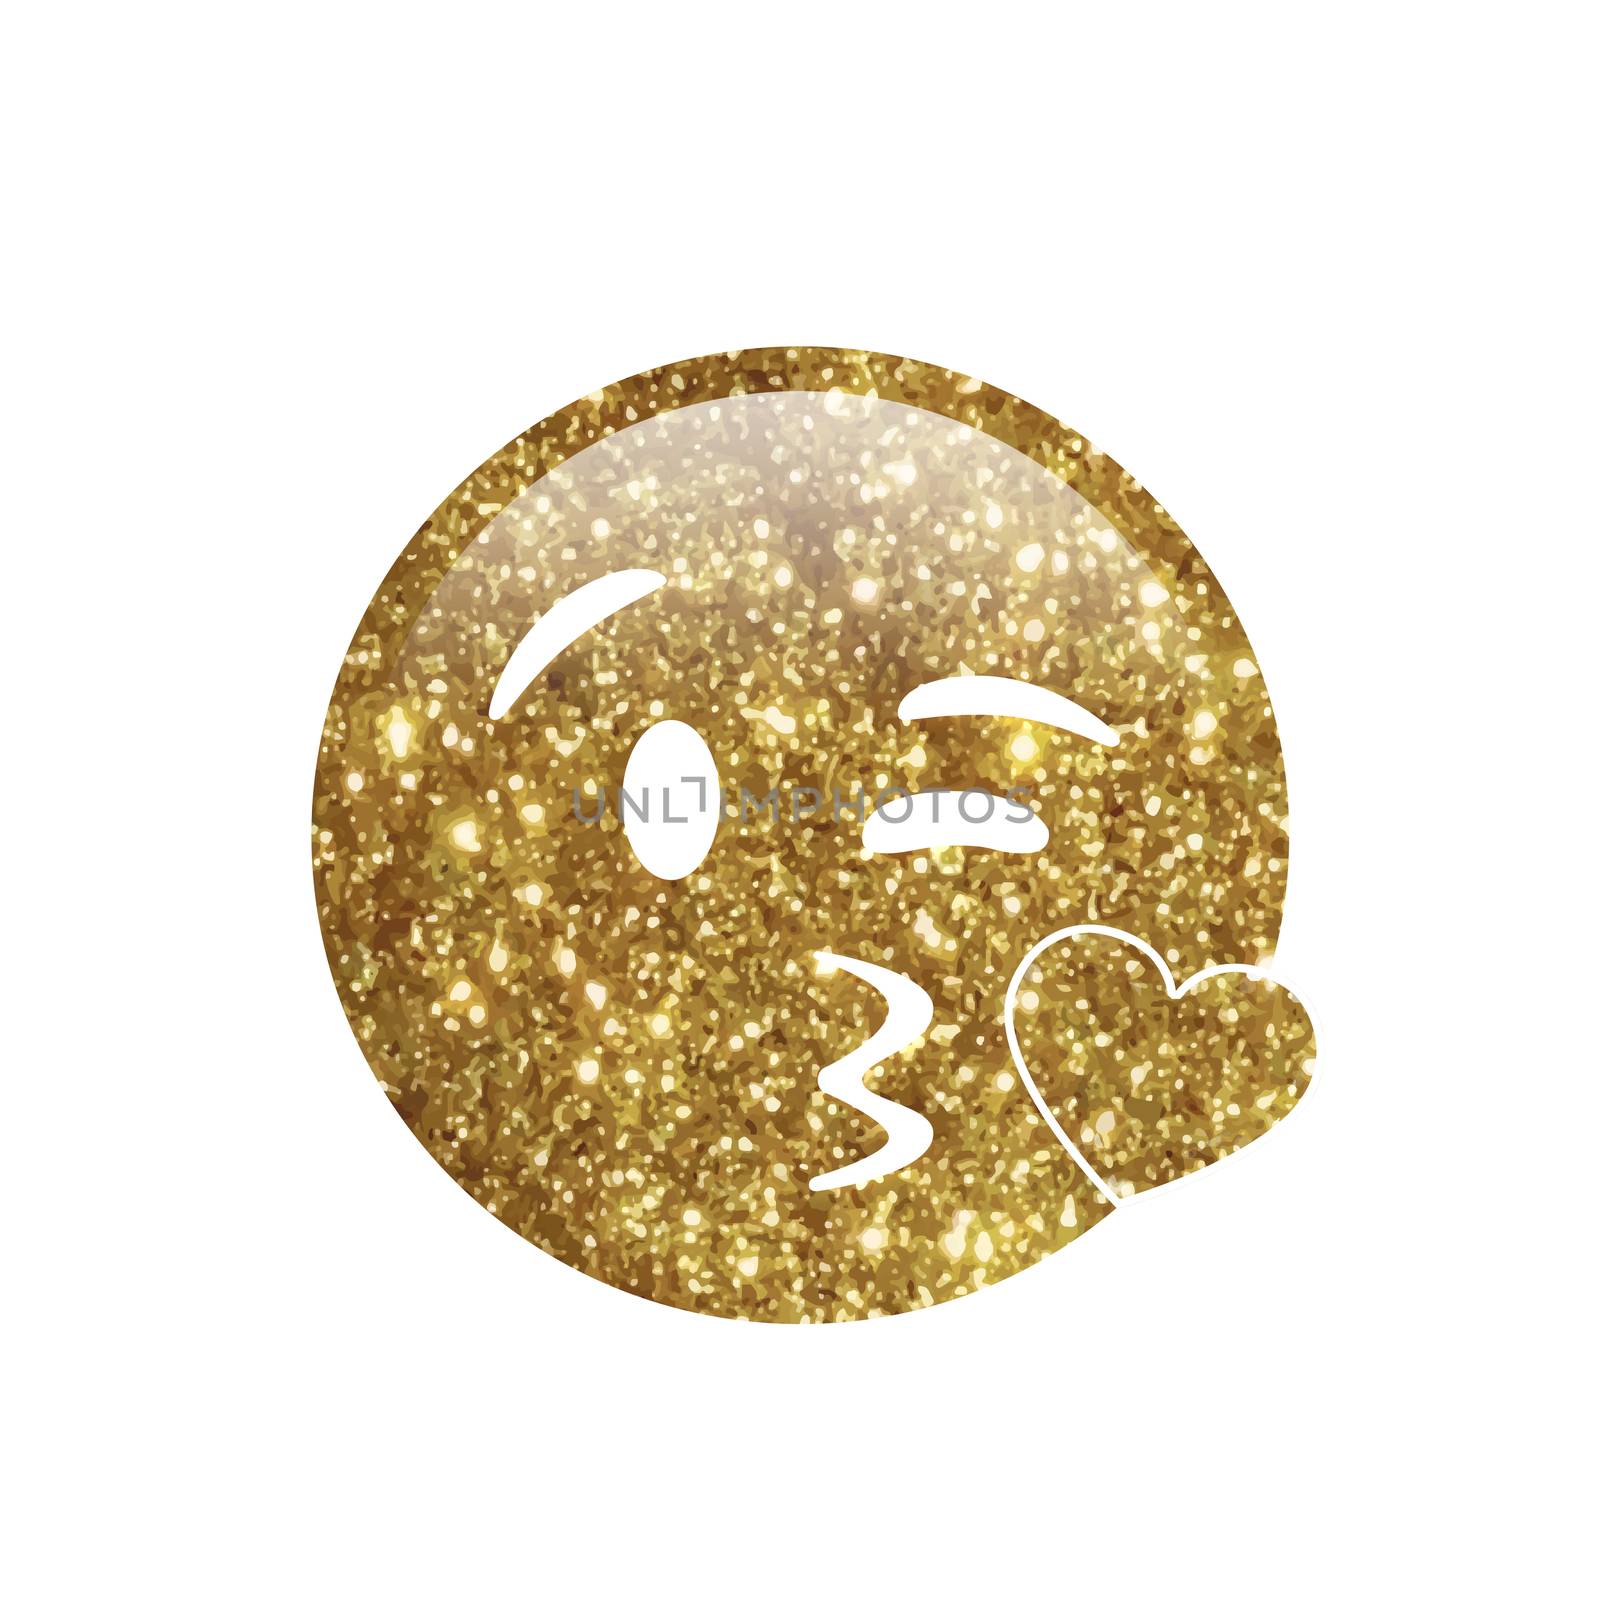 isolated golden glitter smiley face with kissing mouth icon by cougarsan